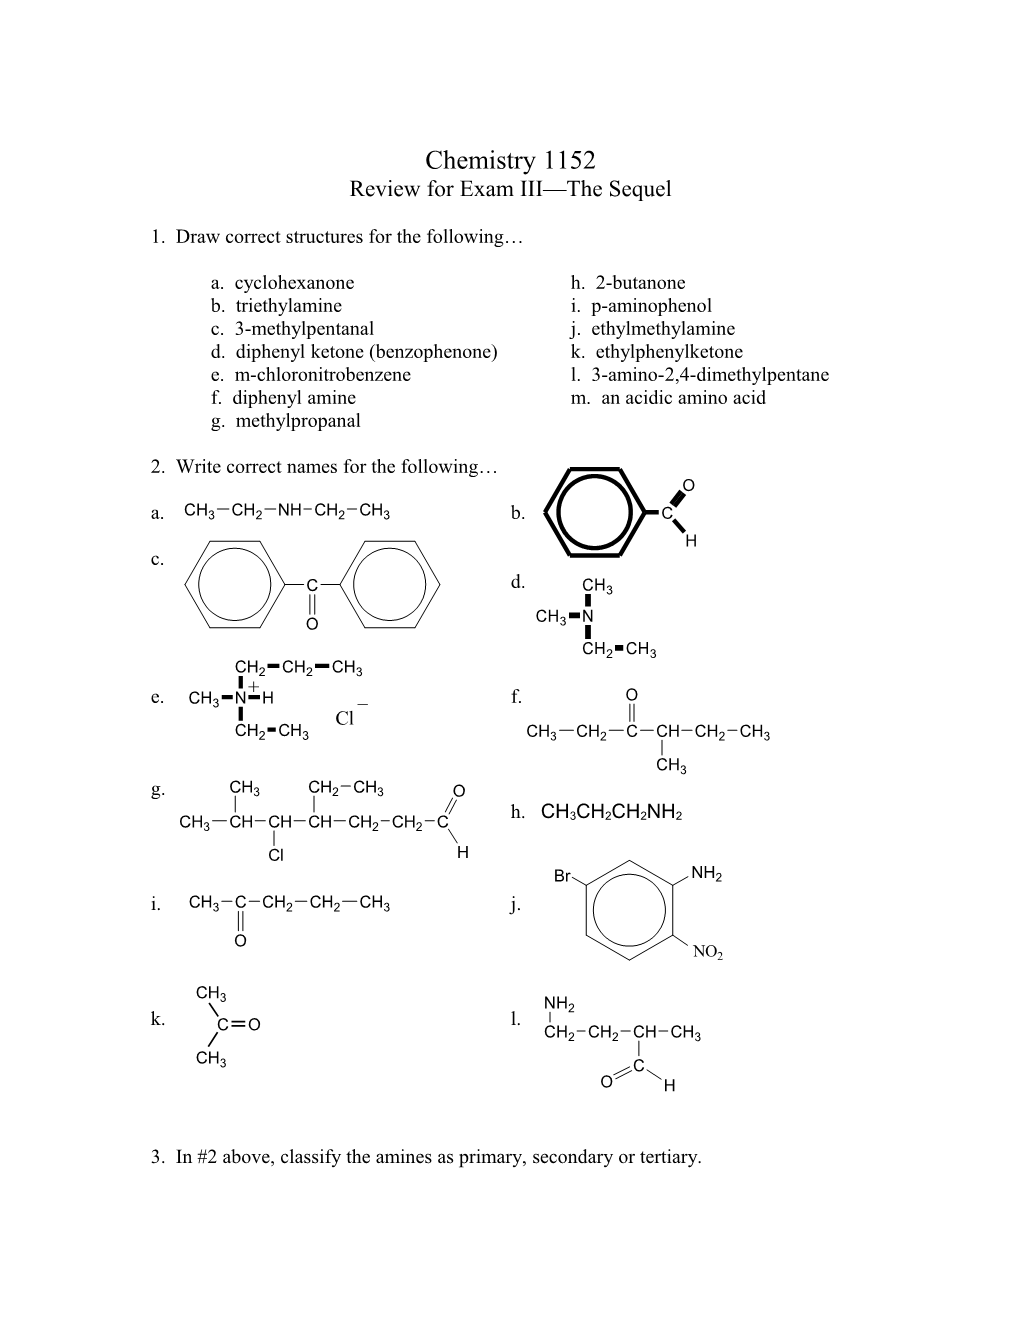 Chemistry 1152Review for Exam III the Sequelpage 1